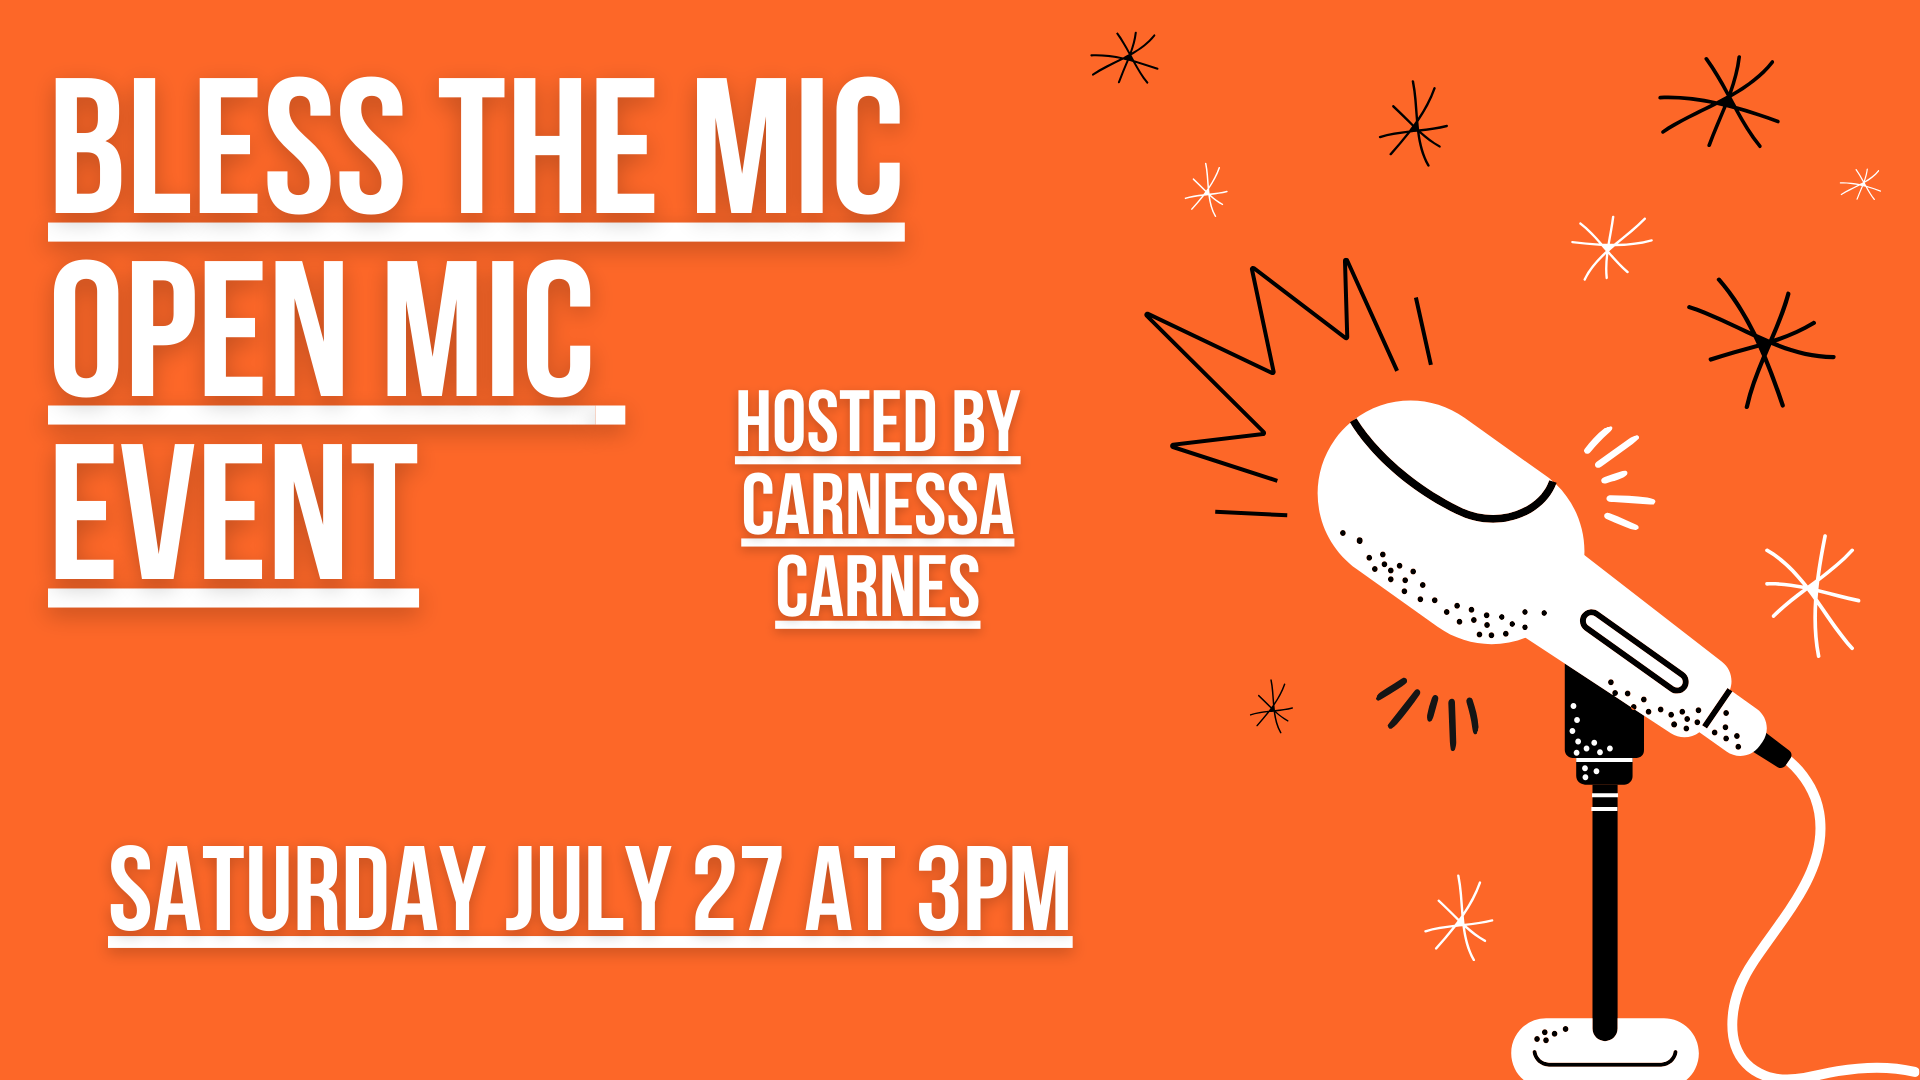 Bless the Mic Open Mic event, Saturday, July 27 at 3:00 pm